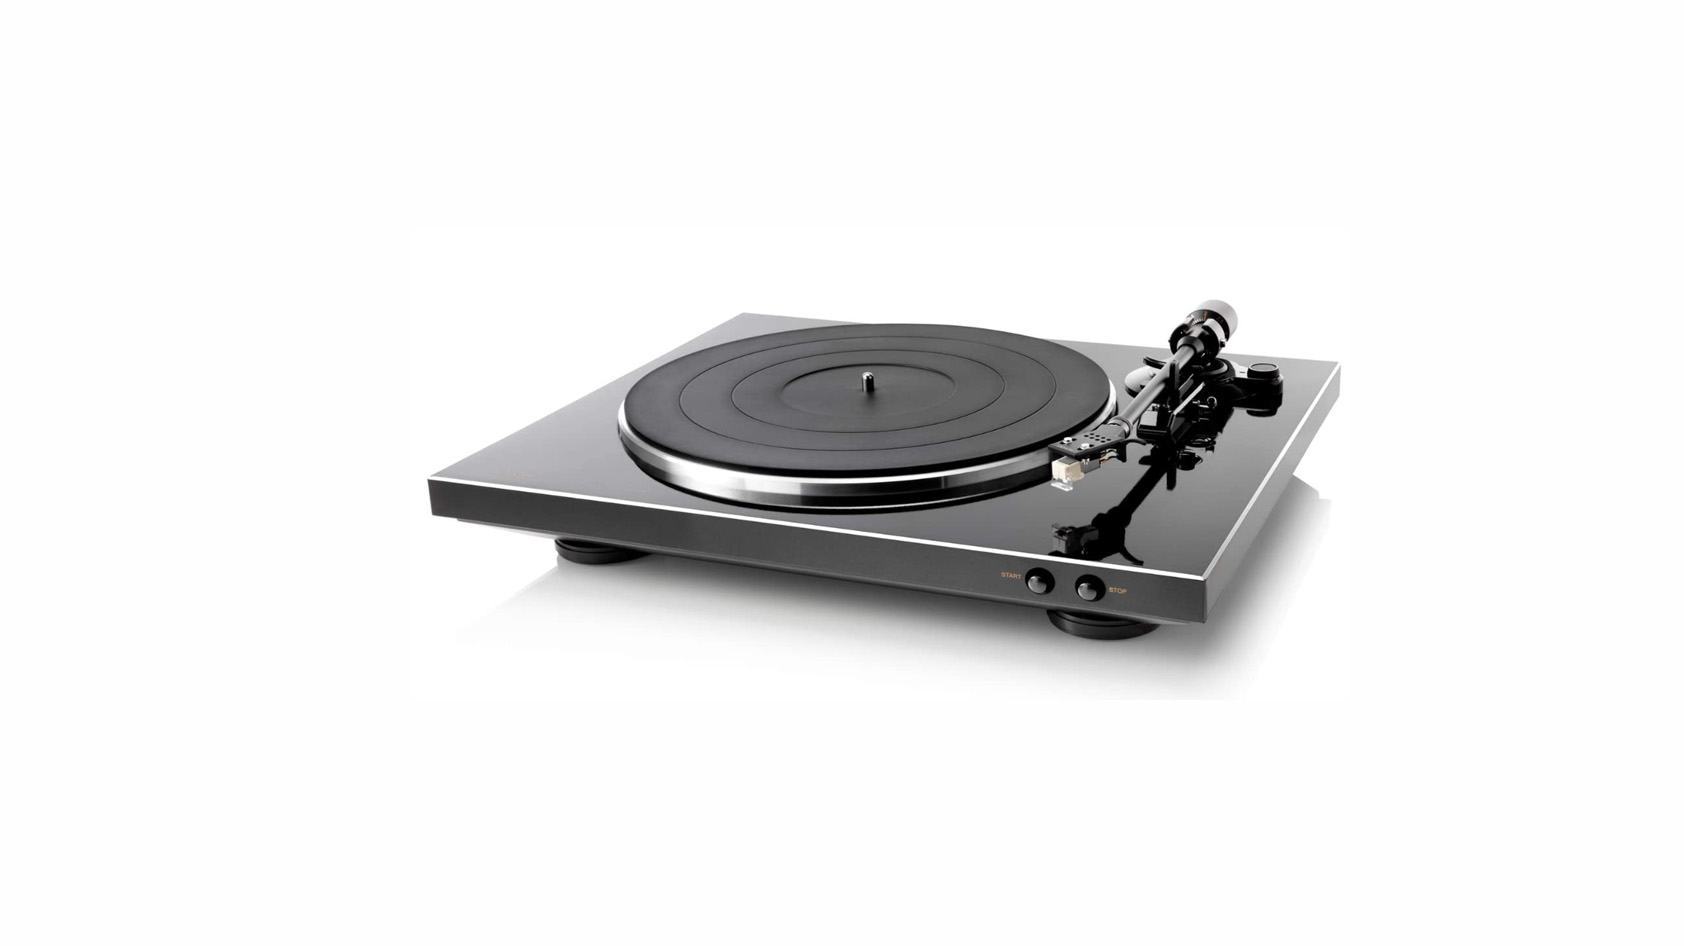 Product image of a Denon DP-300 F turntable on a white background